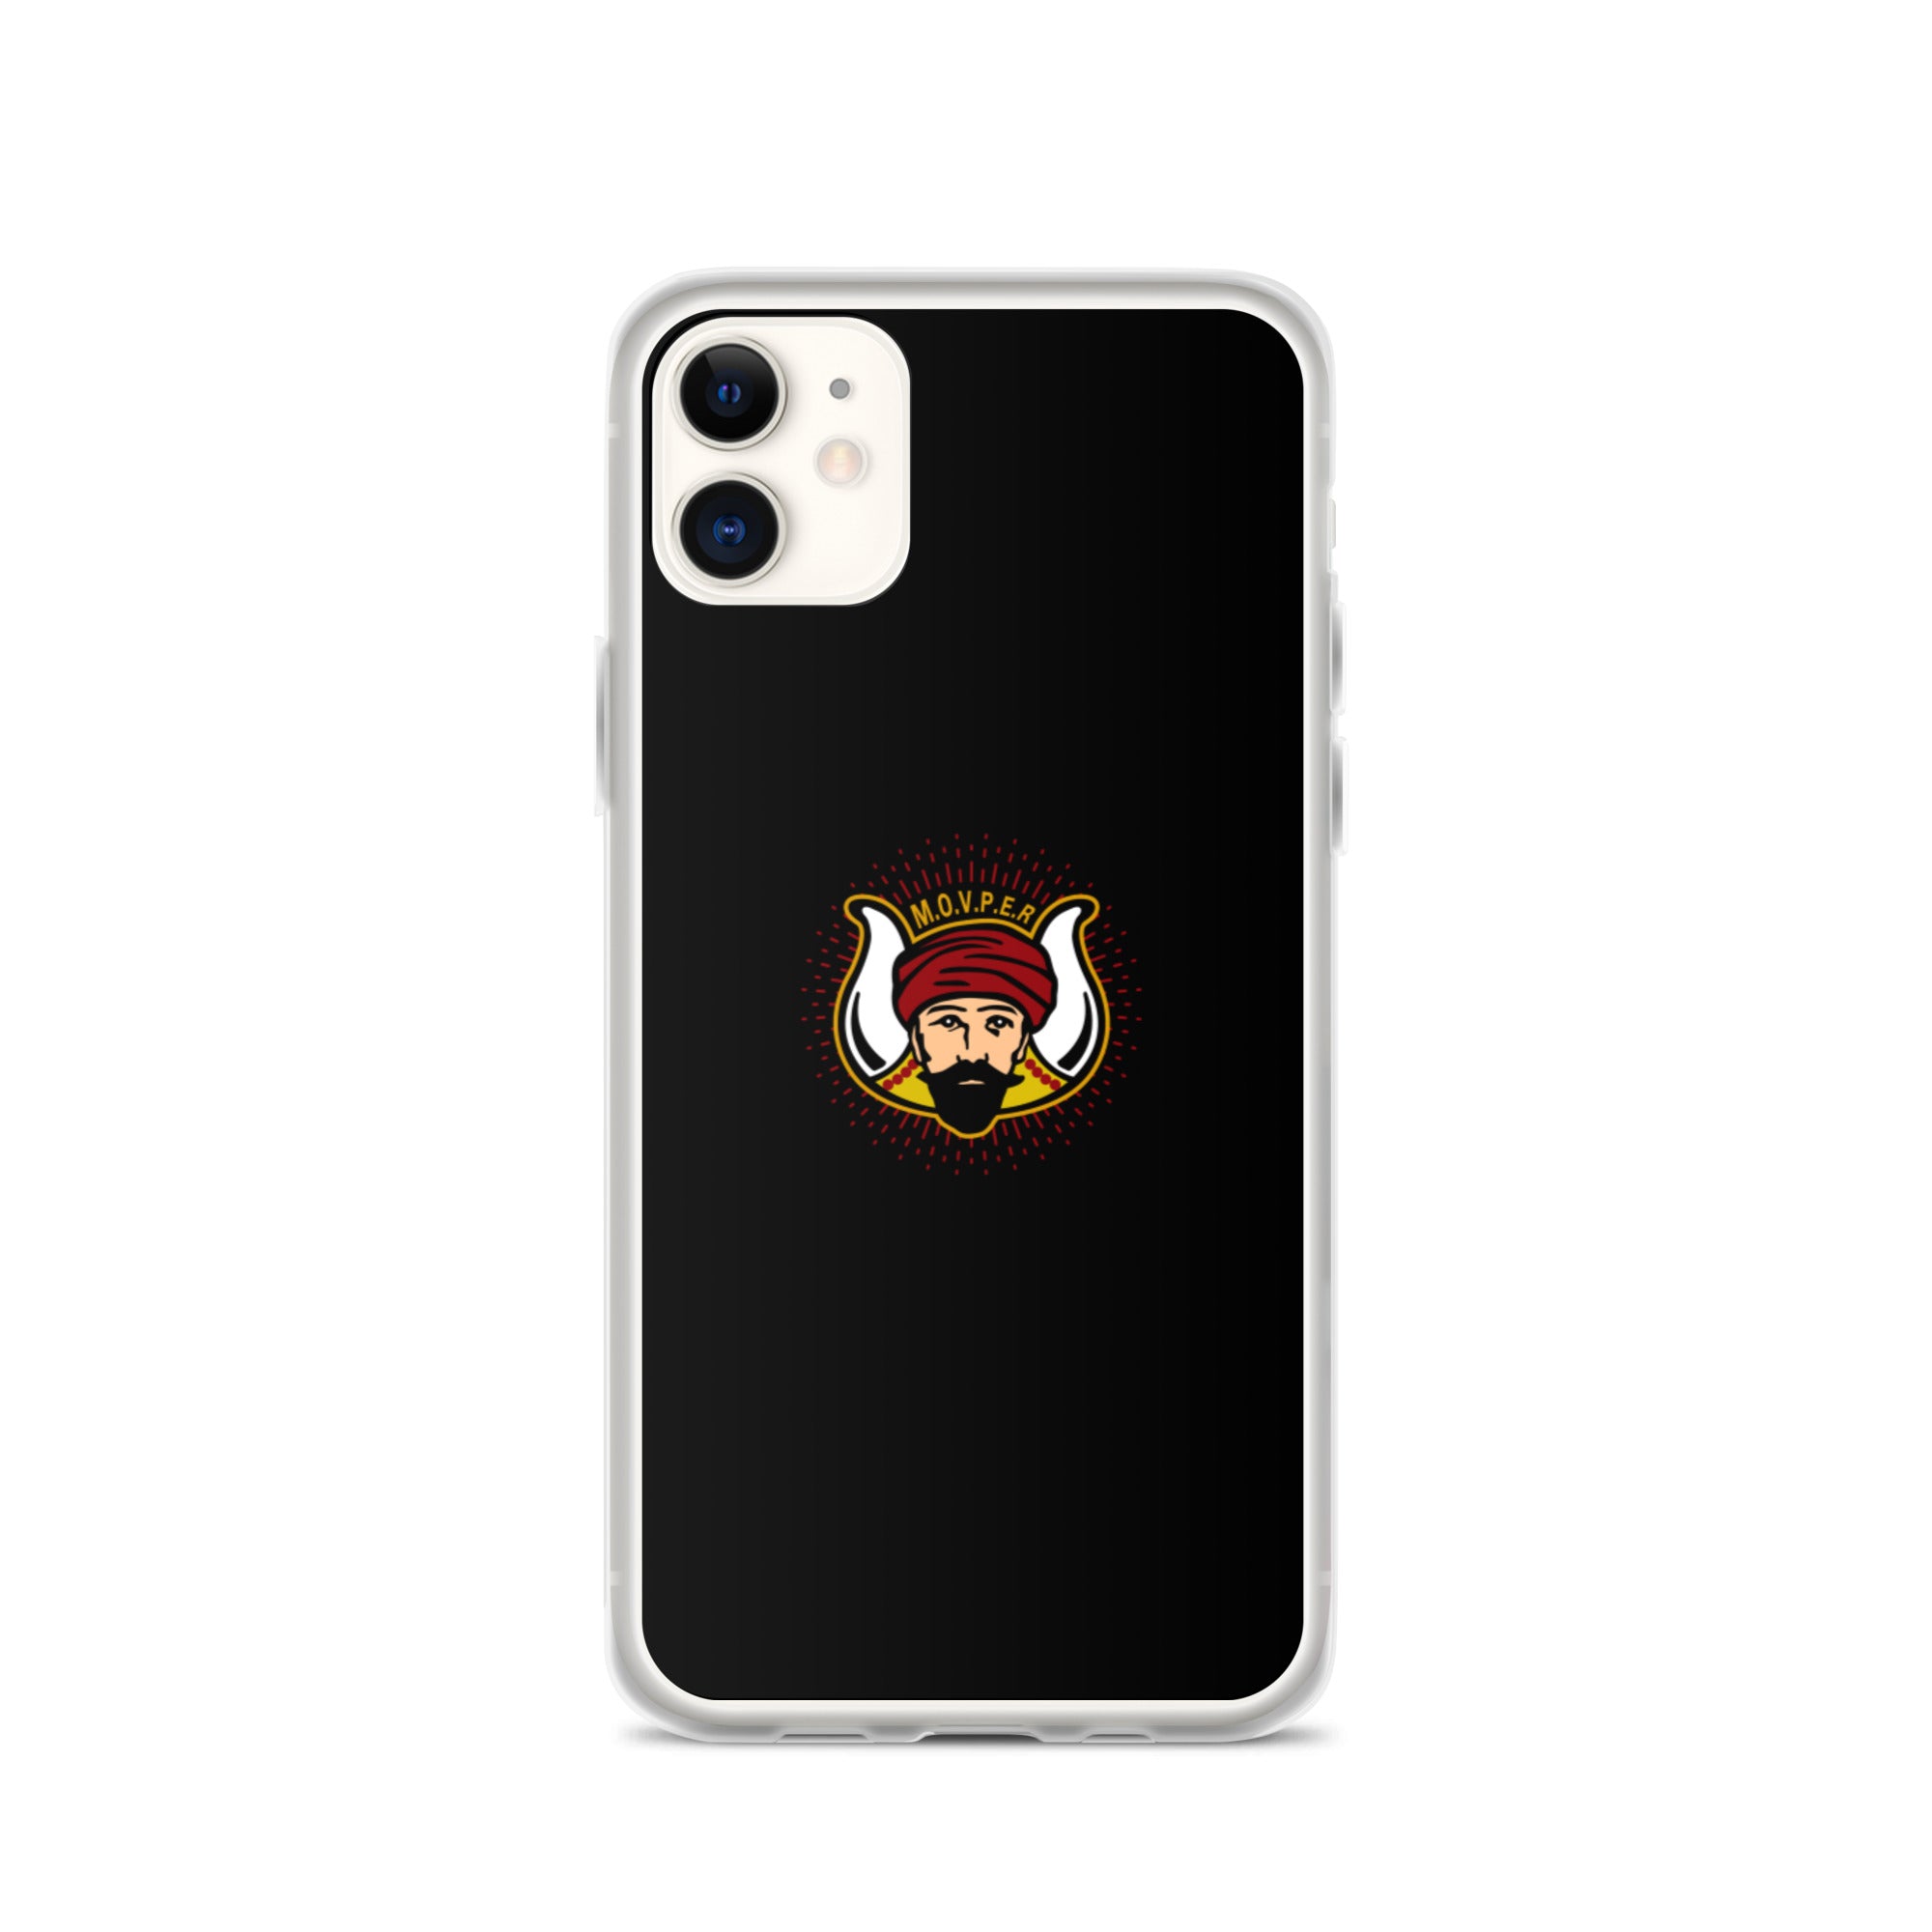 MOVPER No. 1 iPhone Case